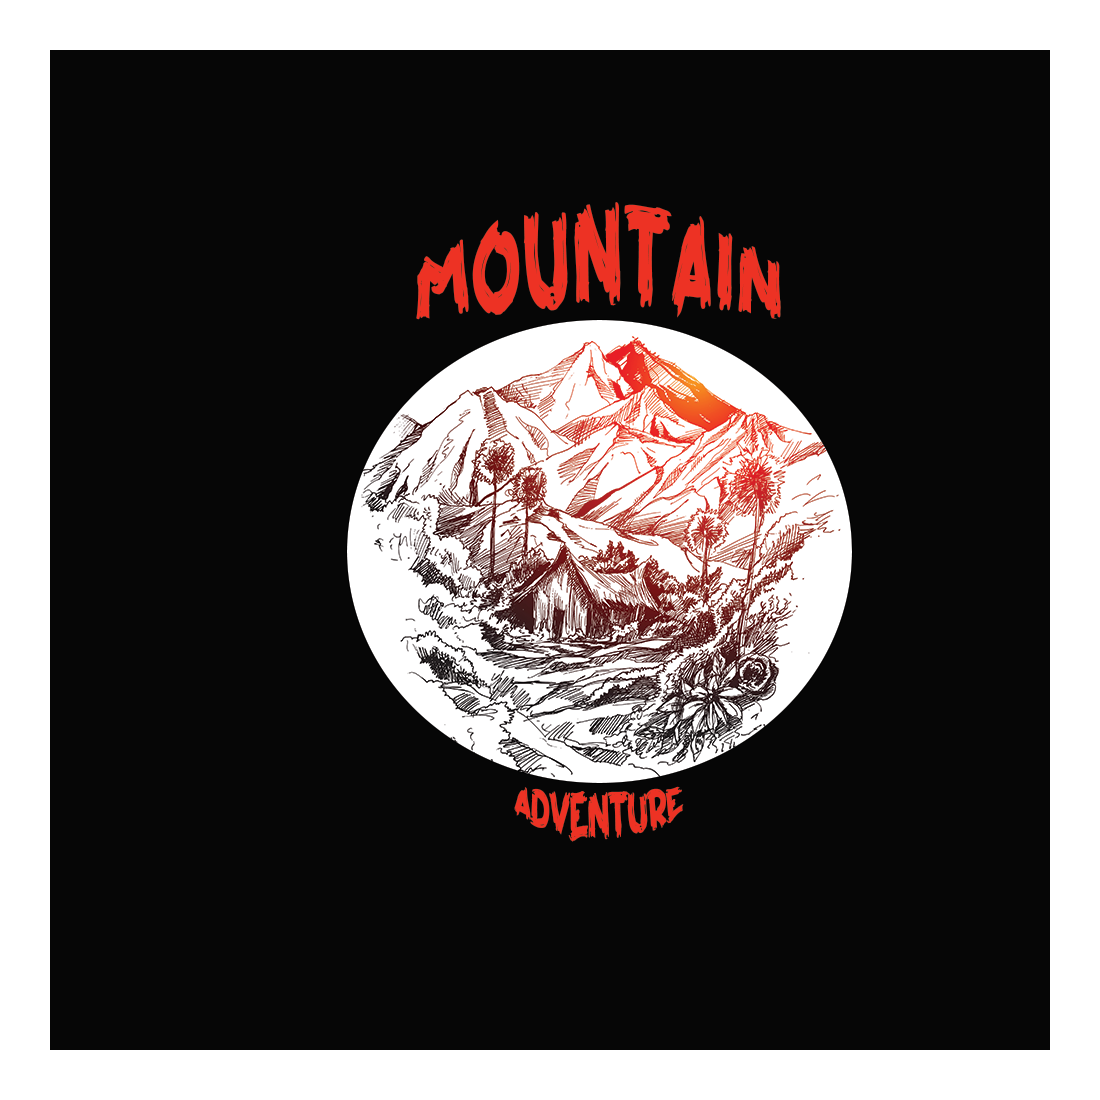 Tshirt Designs - Vintage Mountains preview image.